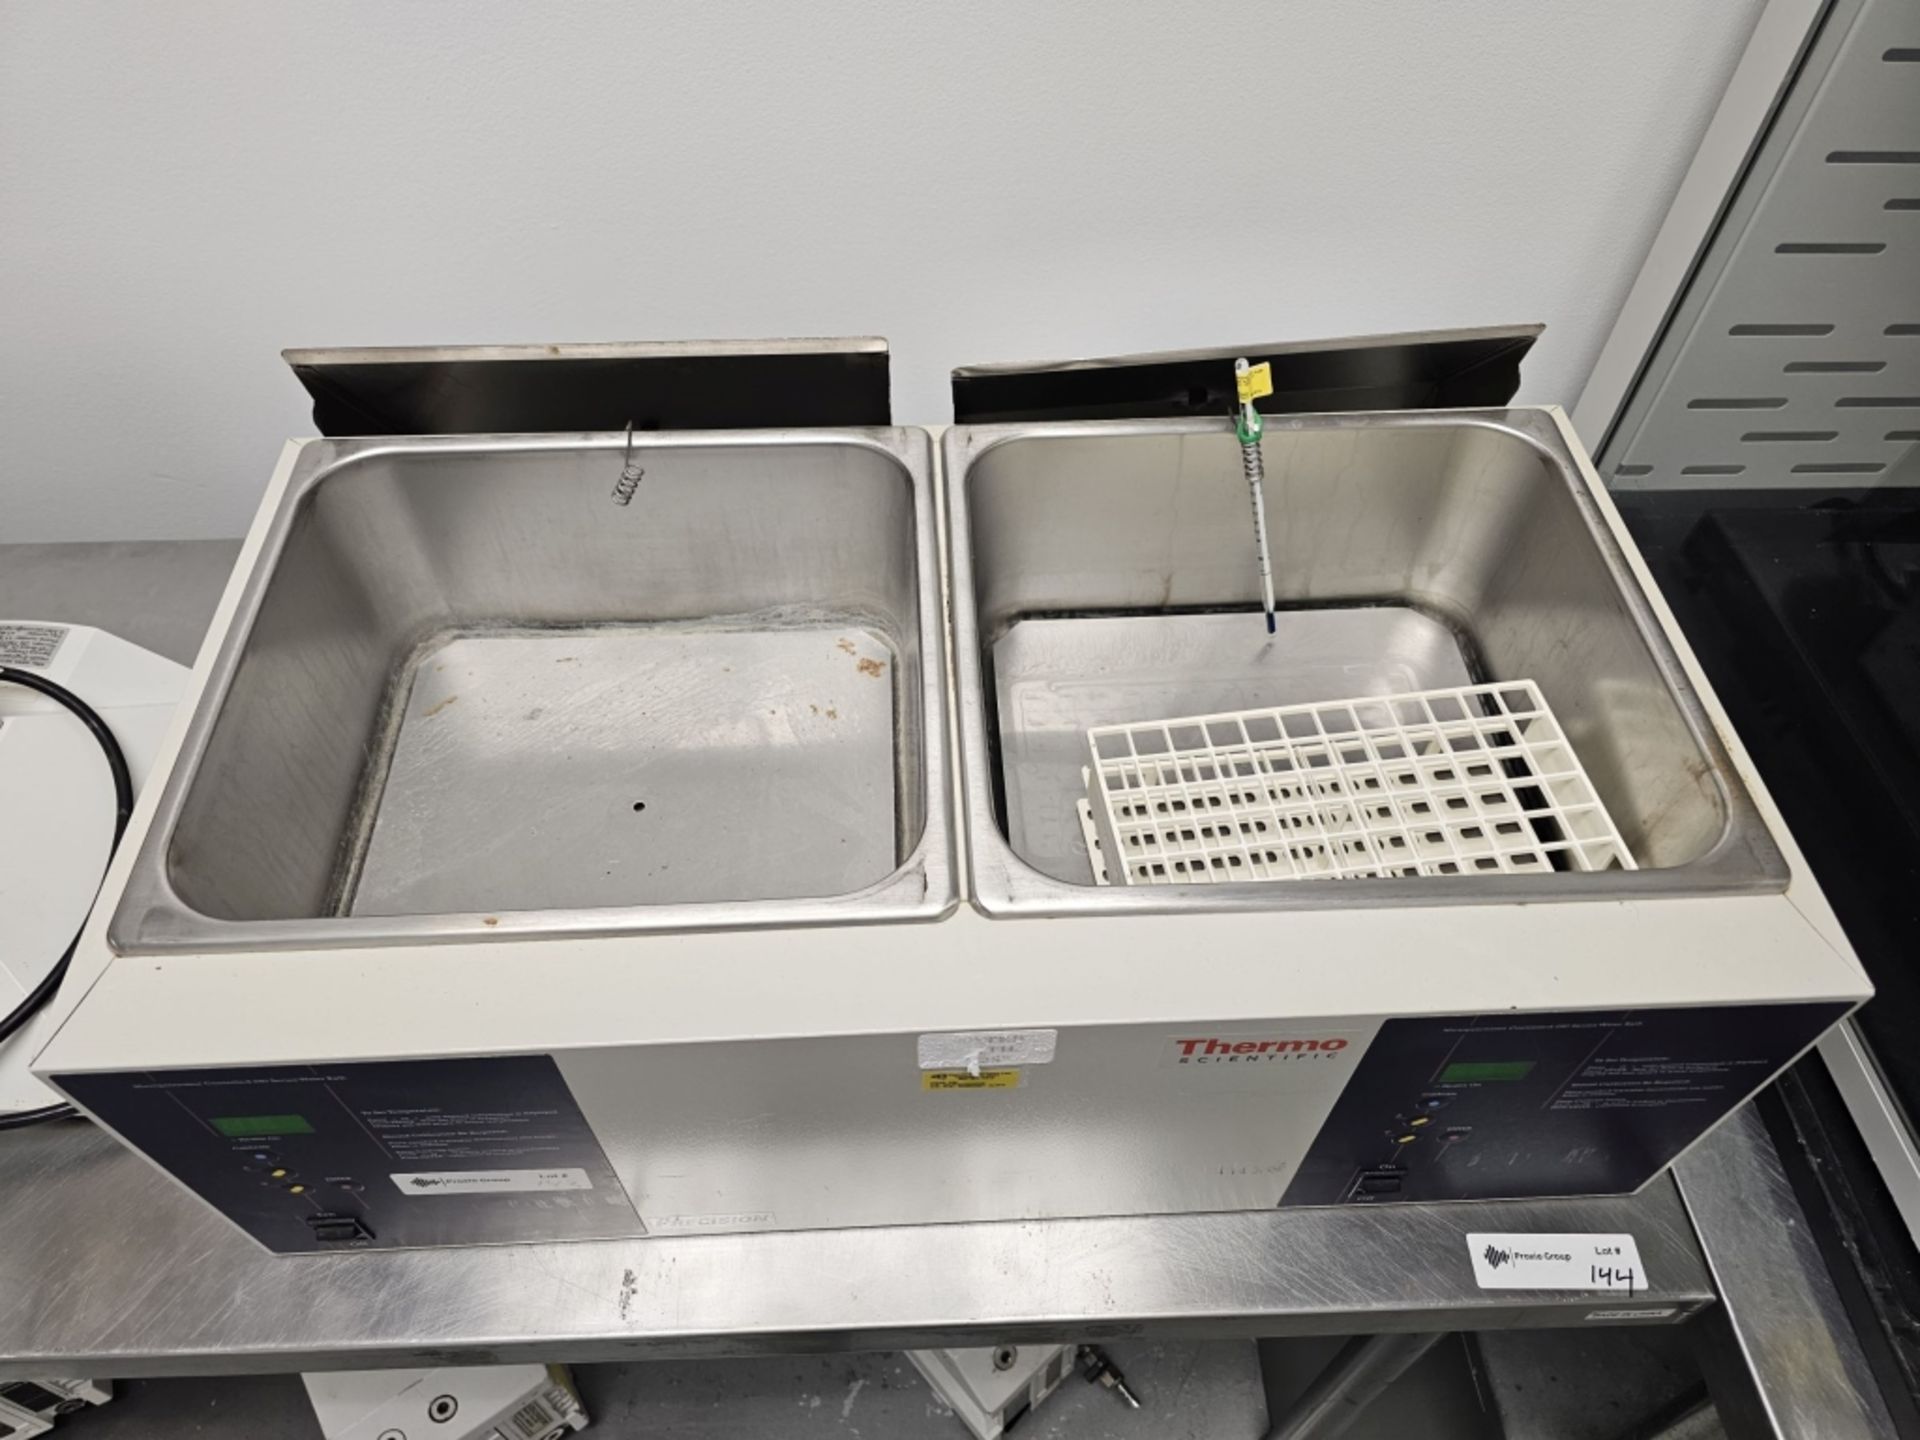 Thermo Scientific Model 2853 Percision Series Dual Tank Water Bath sn 207880-581 - Image 2 of 3